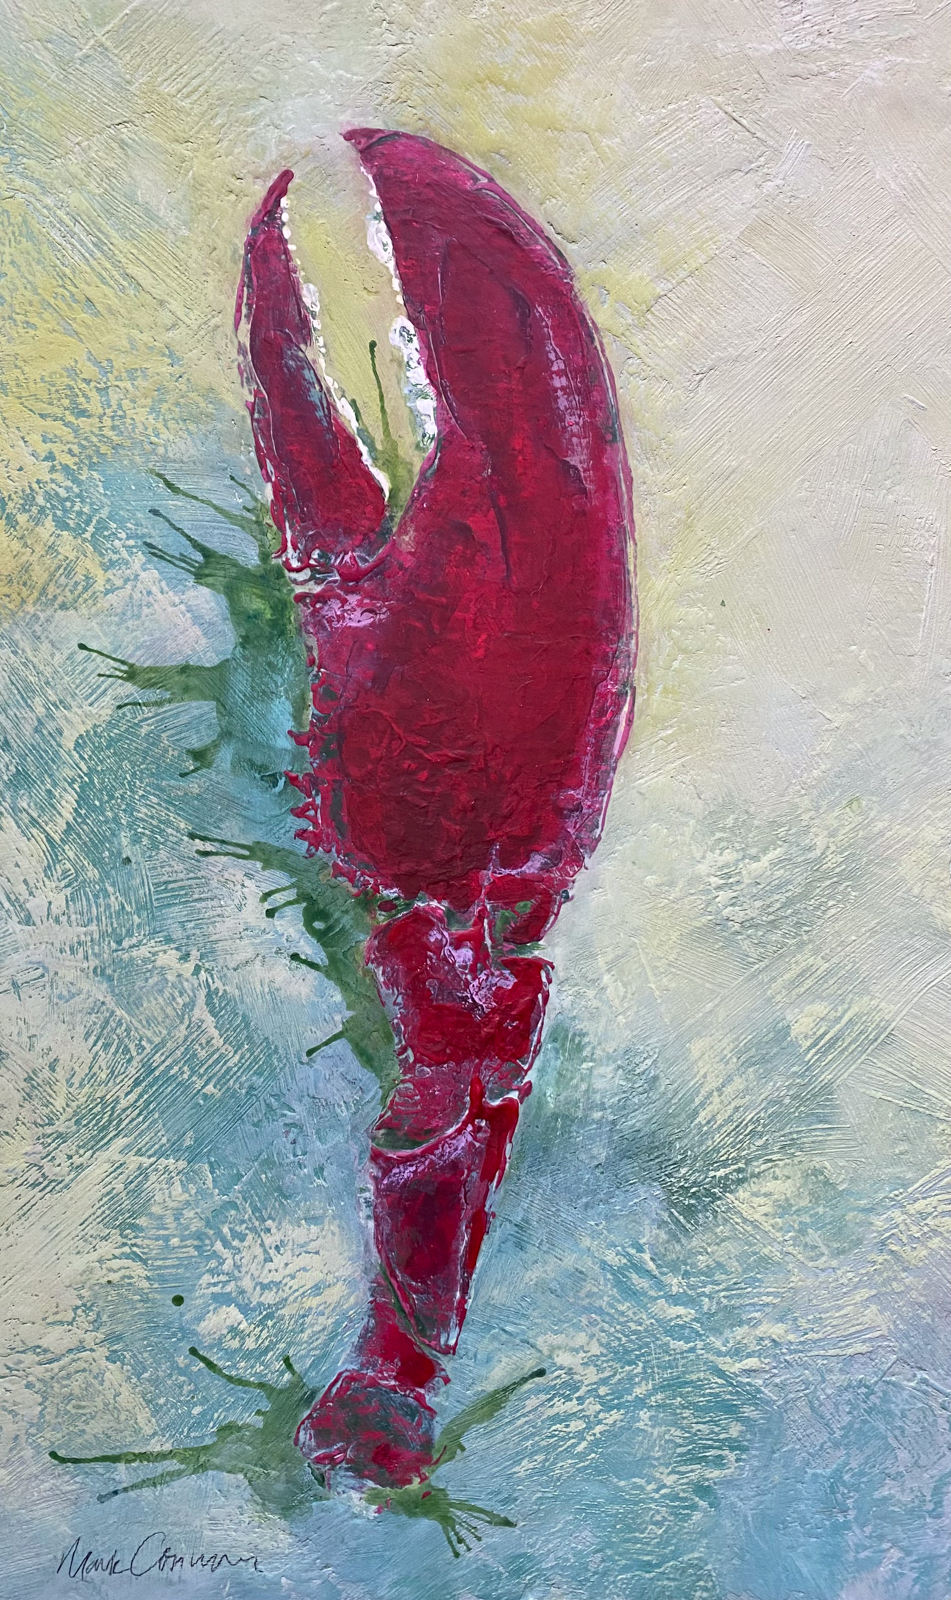 Cooked lobsters are red. This one is deep burgundy, painted in textured layers showing the intricate parts that allow movement of the claw. A spontaneous spatter of green paint close under the claw reminds us that this creature was once green and alive and suggests the idea that control versus letting go is part of an artist’s continuum of technique.